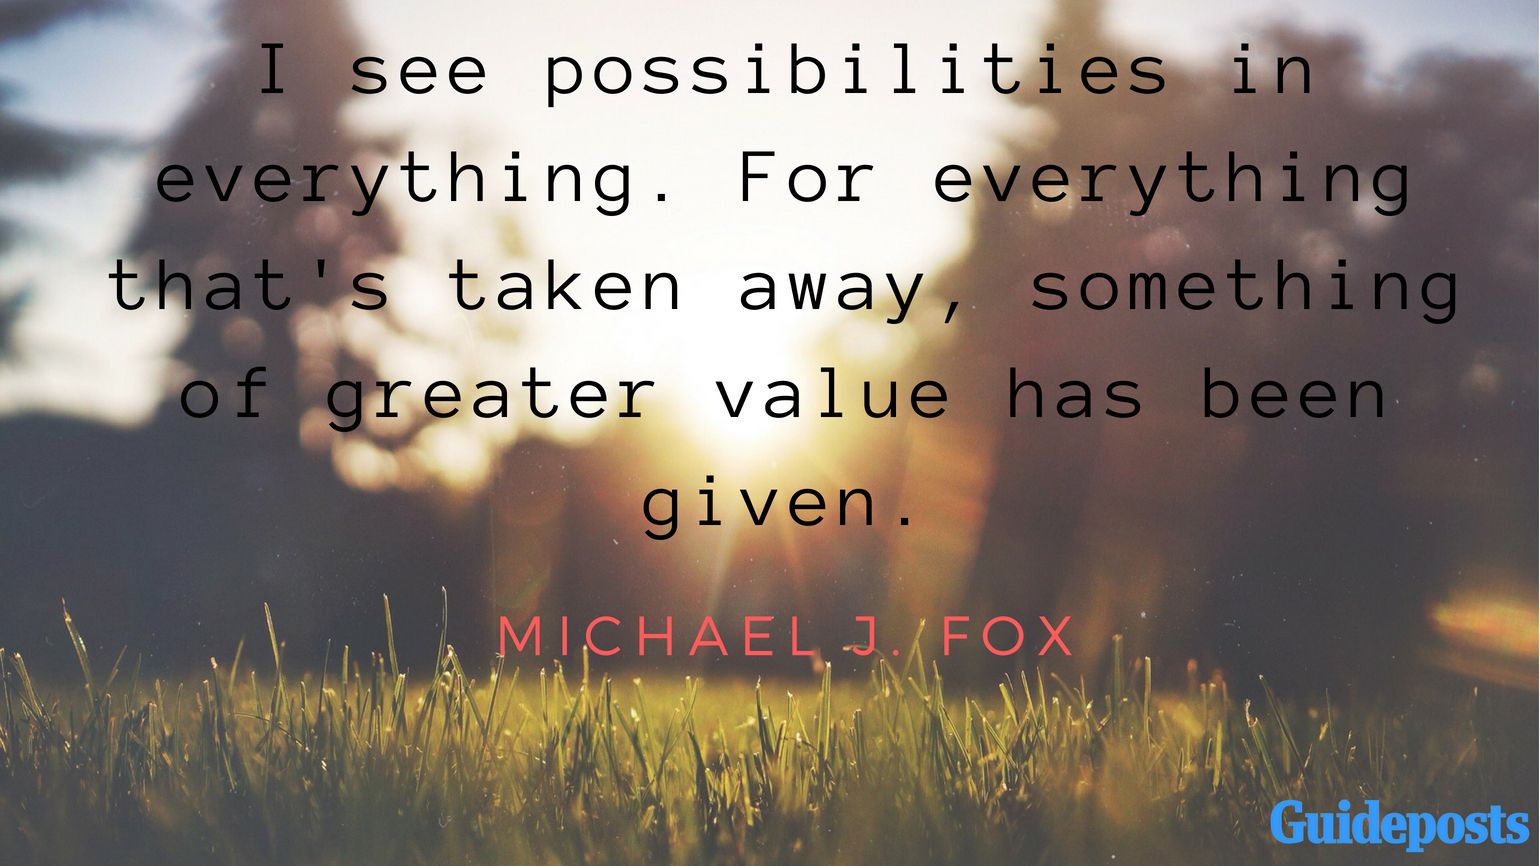 I see possibilities in everything. For everything that's taken away, something of greater value has been given. - Michael J. Fox